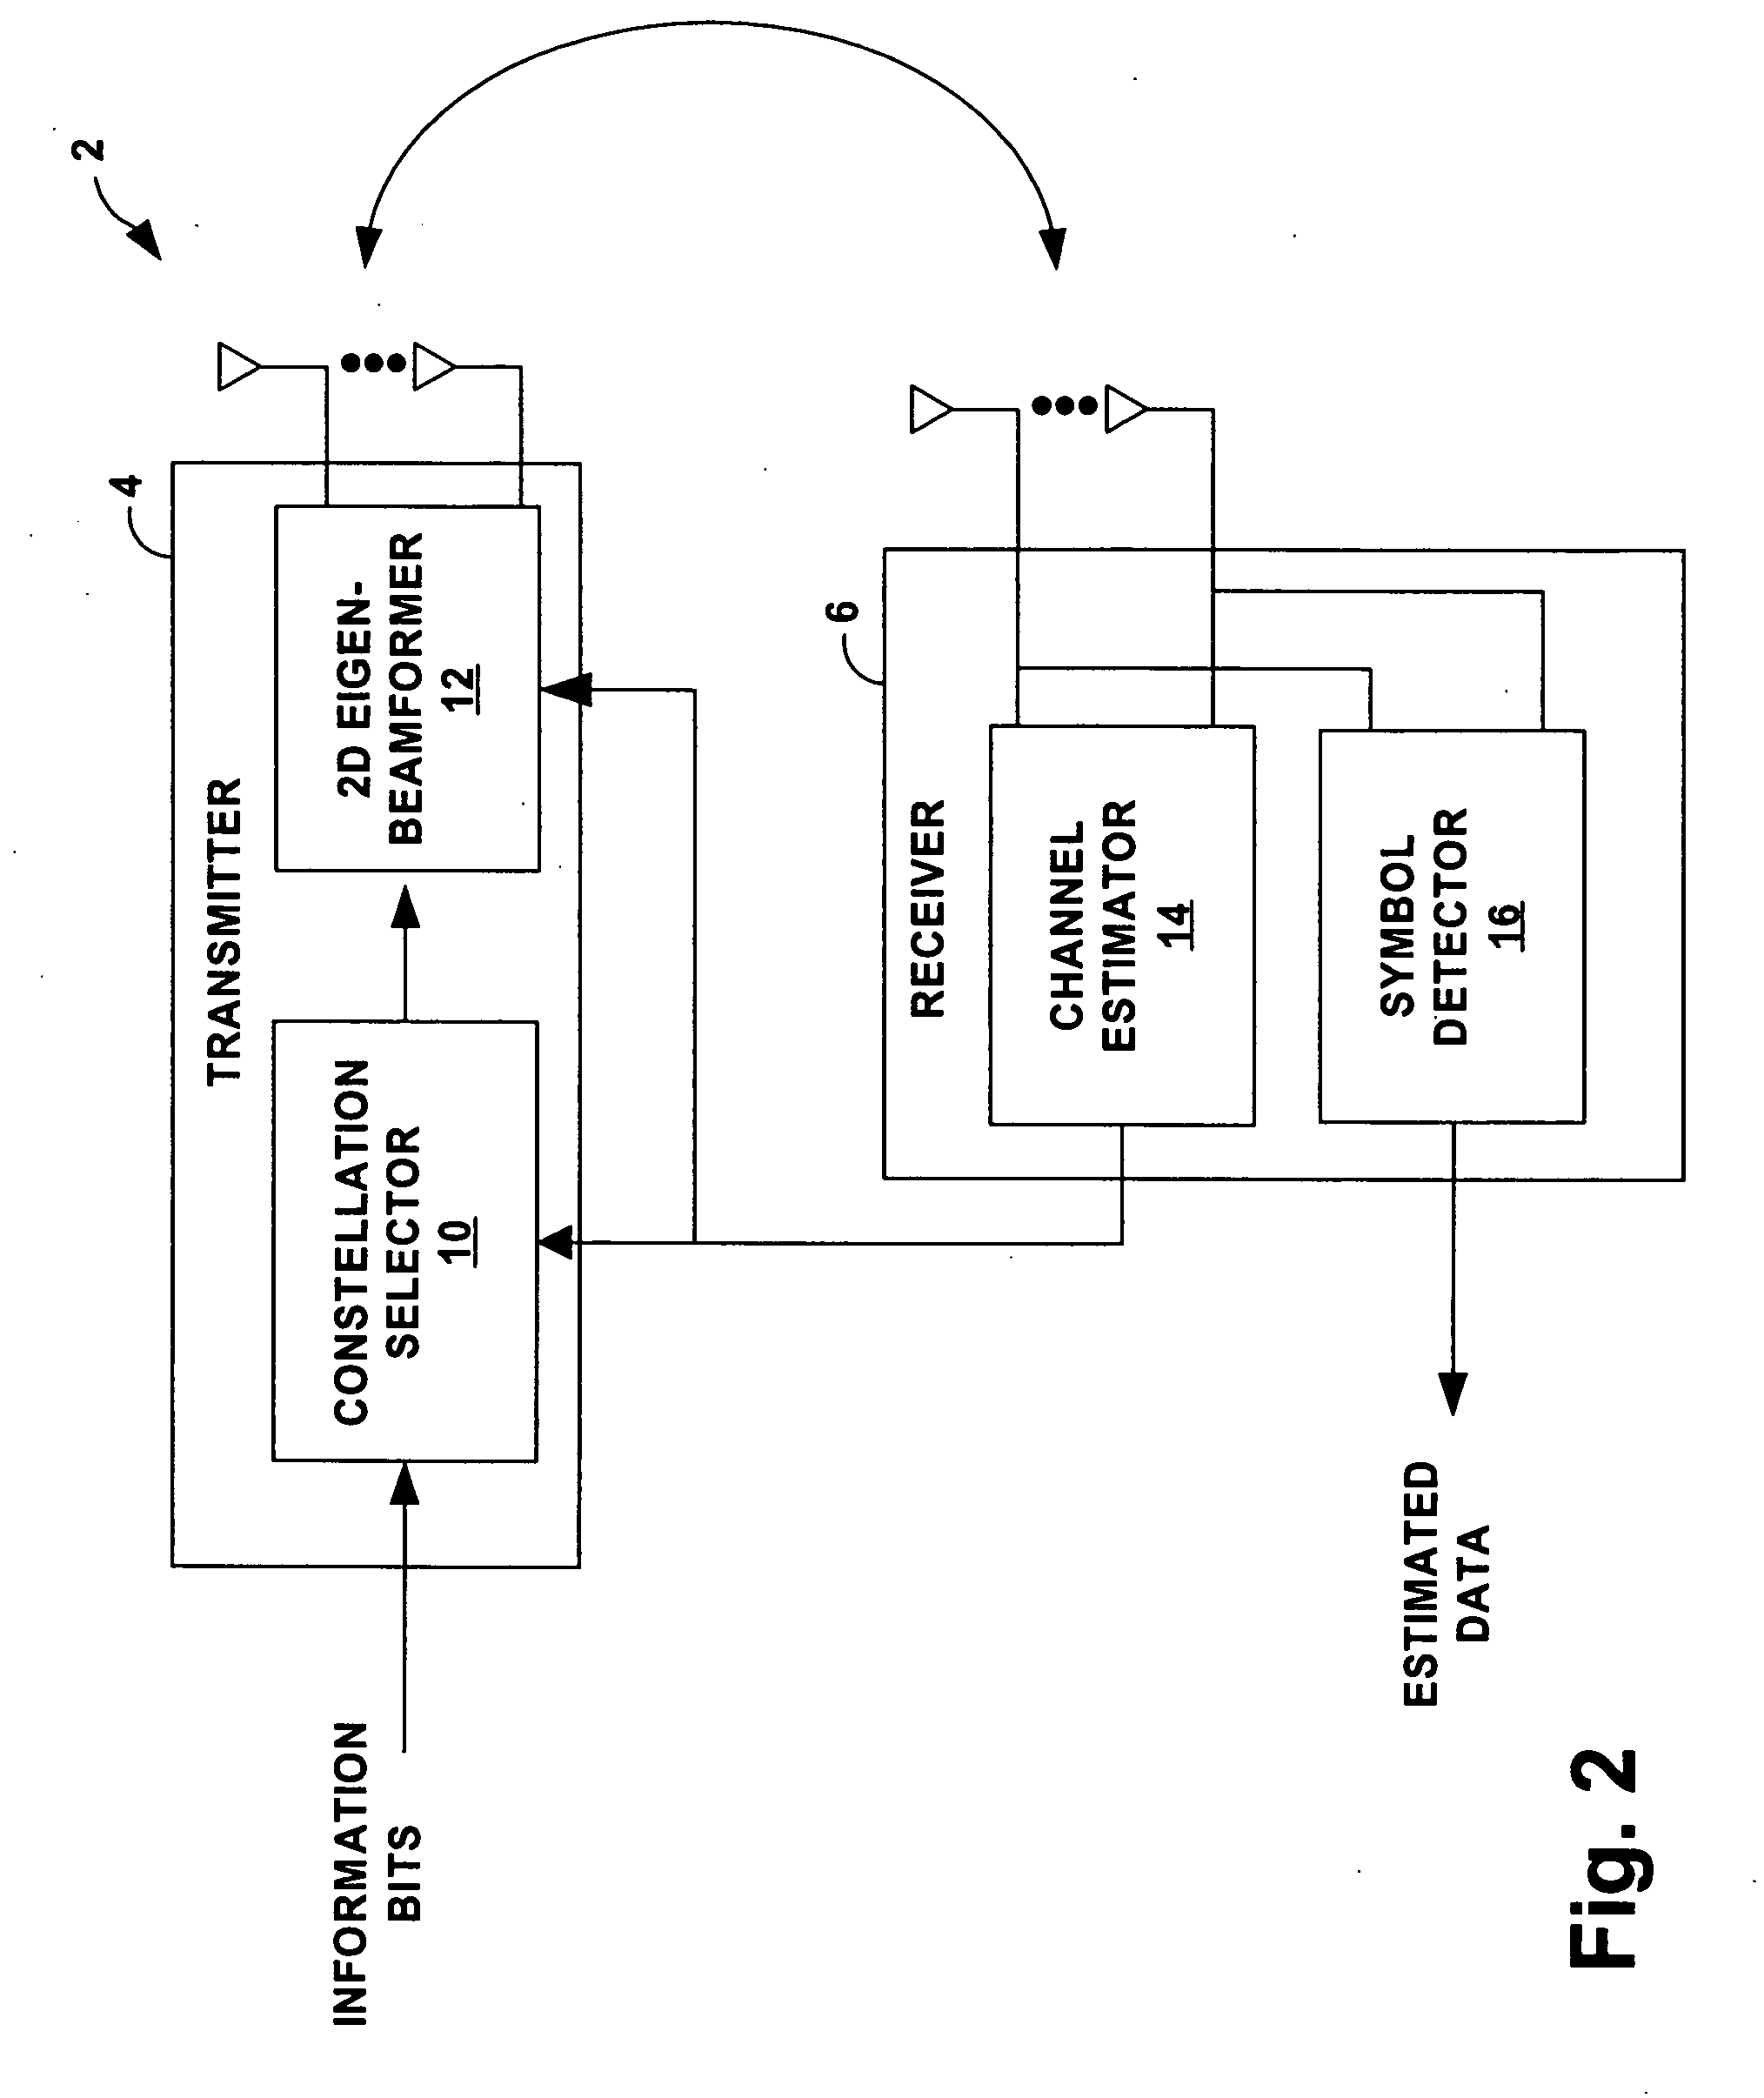 Adaptive modulation for multi-antenna transmissions with partial channel knowledge